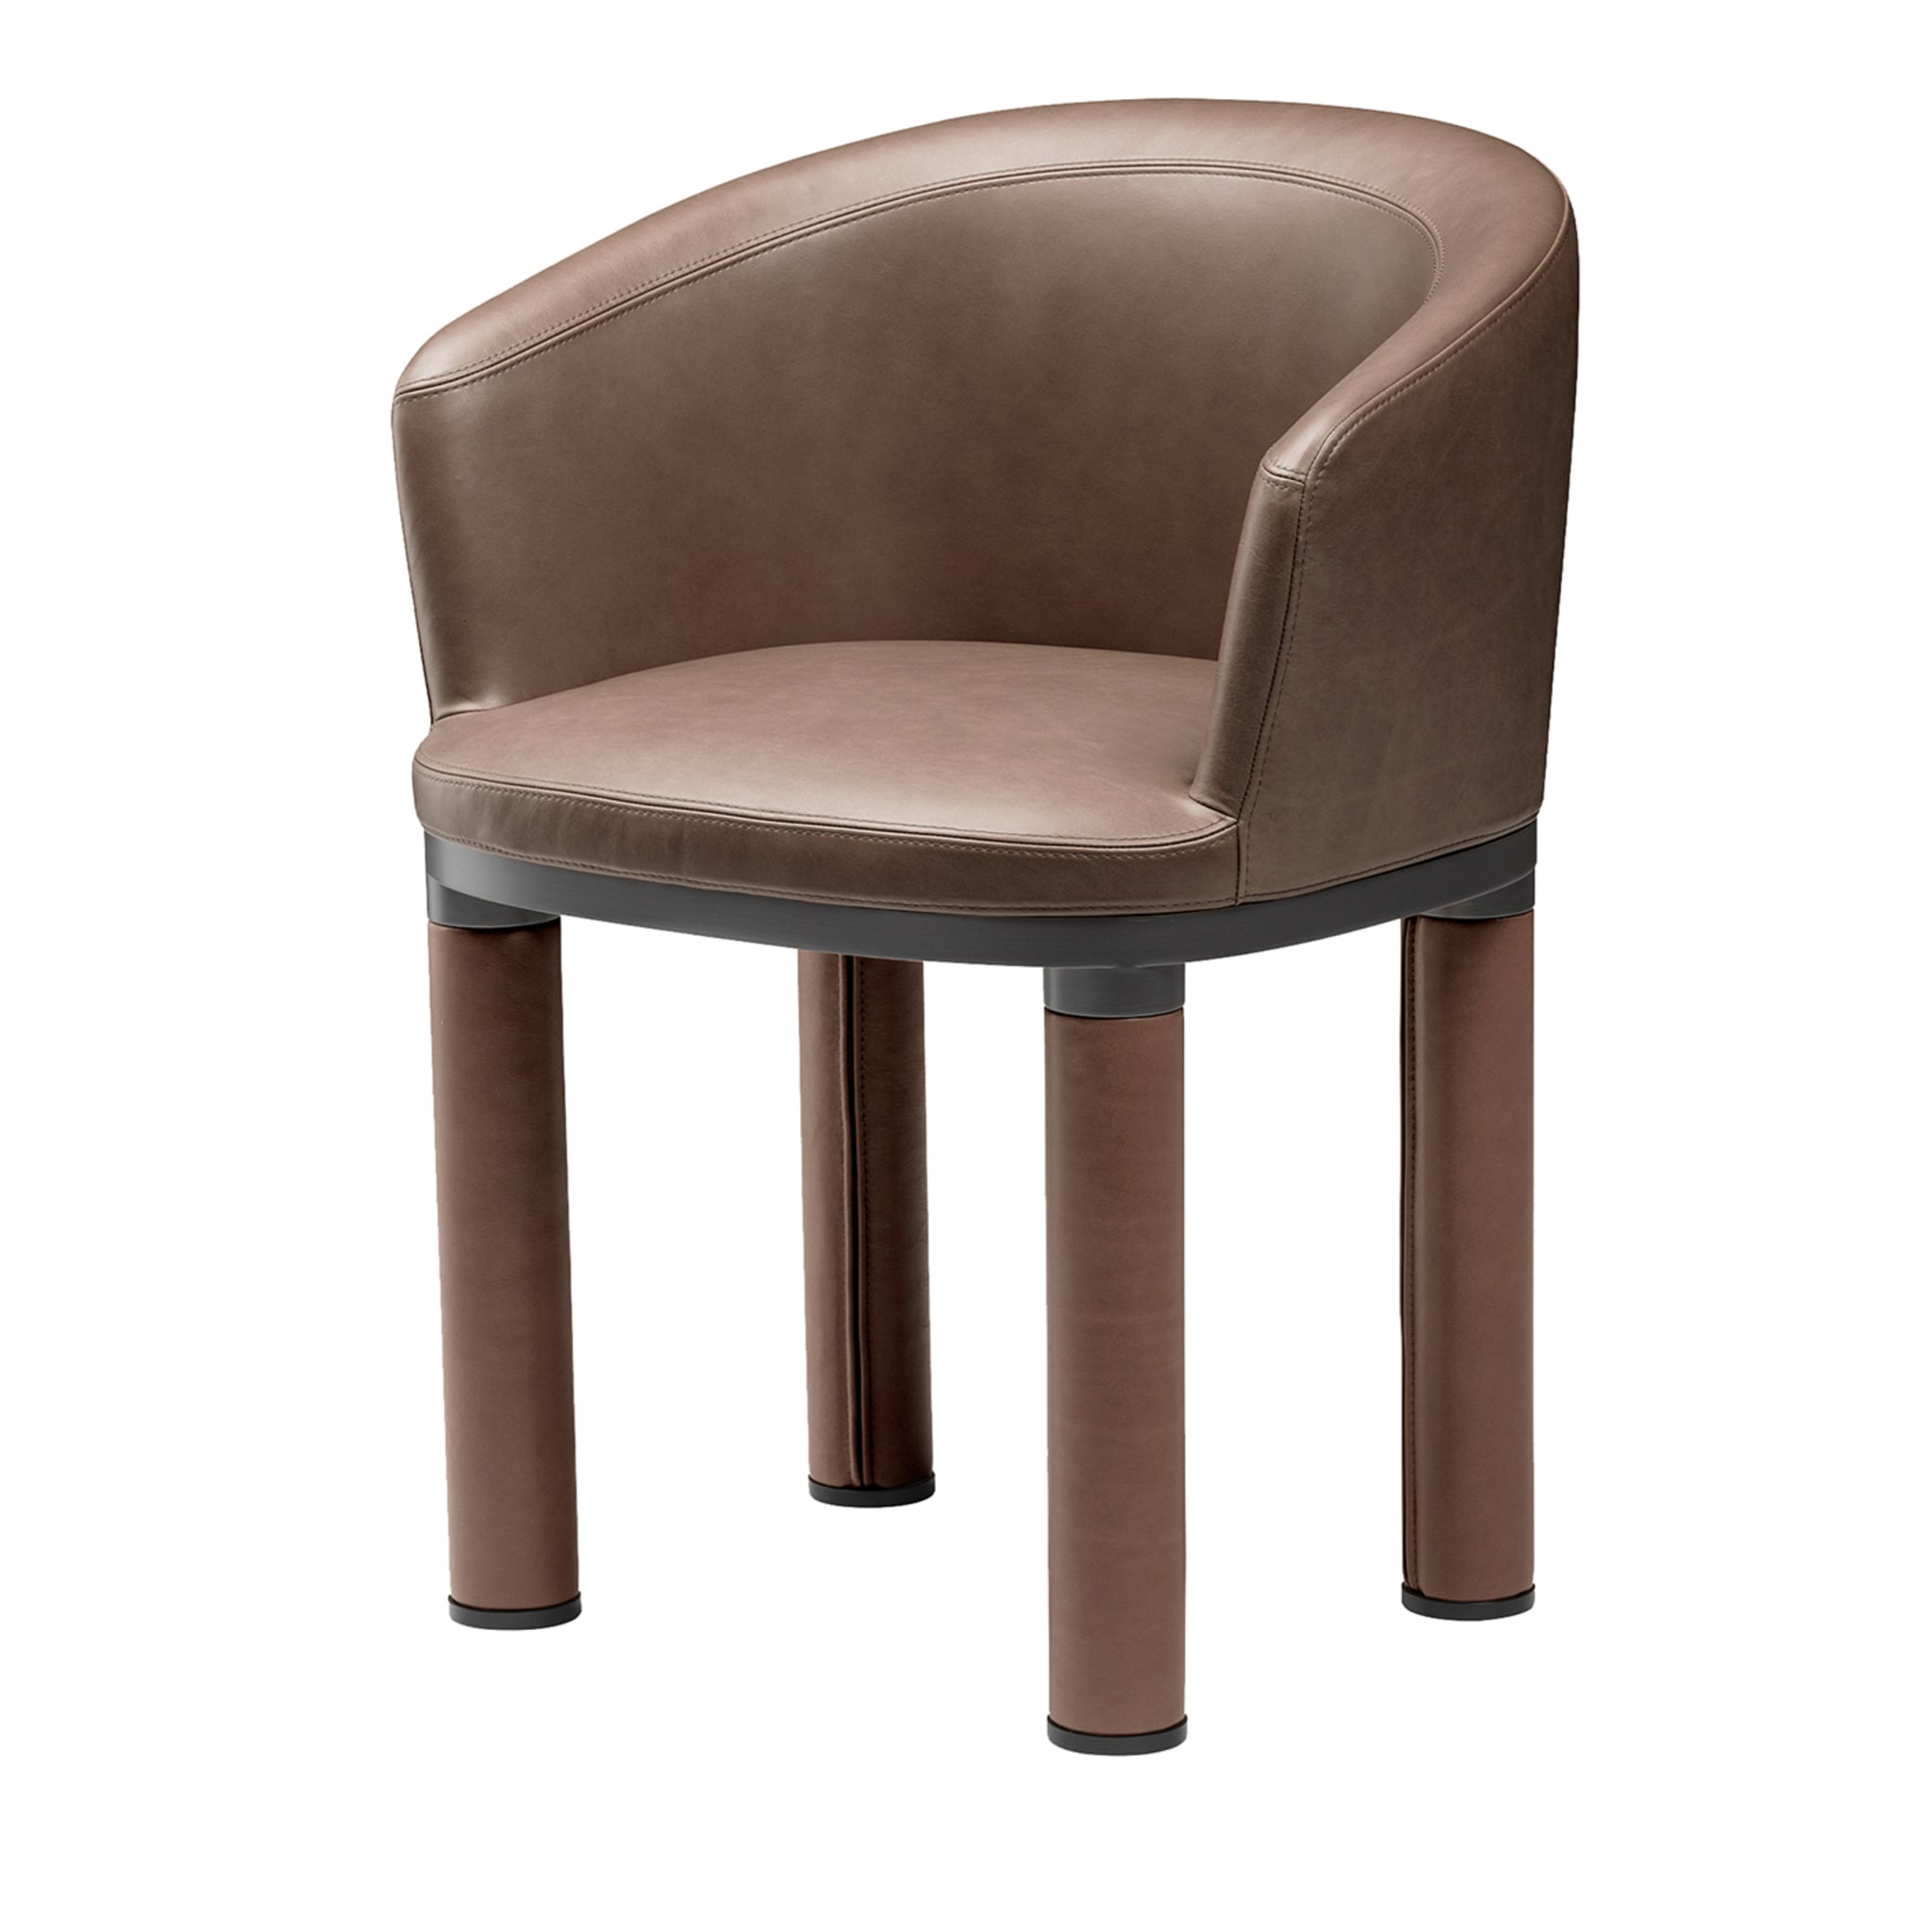 Bold Brown Leather Armchair by Elisa Giovannoni - Alternative view 1